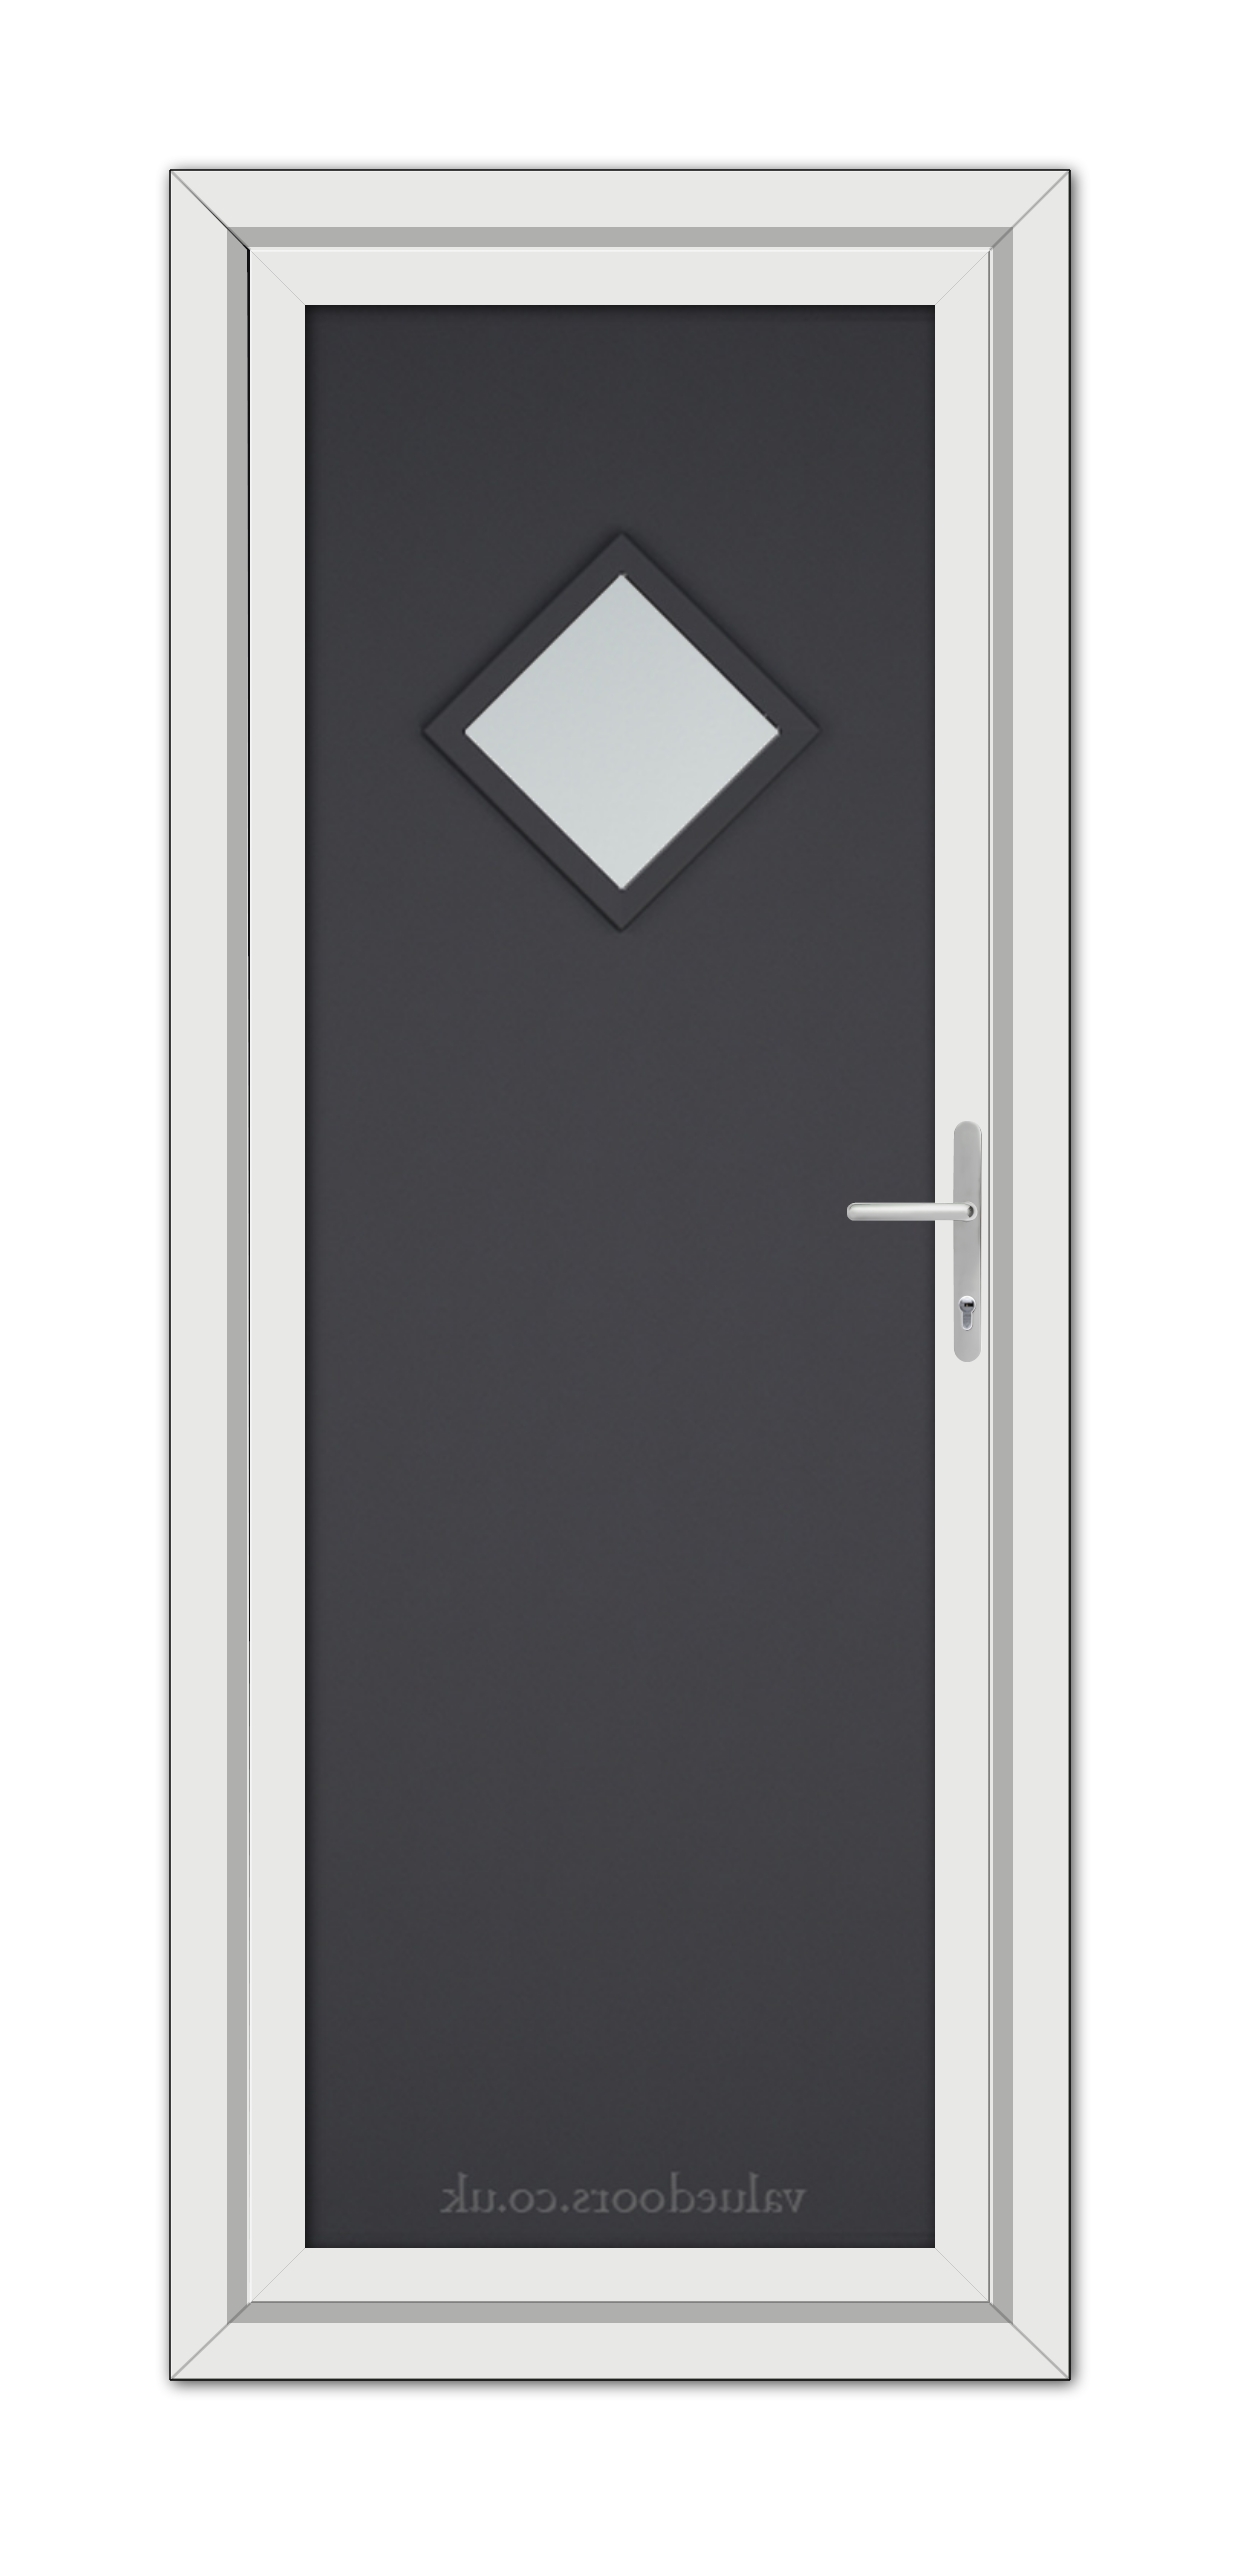 Grey Modern 5131 uPVC door with a diamond-shaped window, framed in white, featuring a silver handle on the right side.